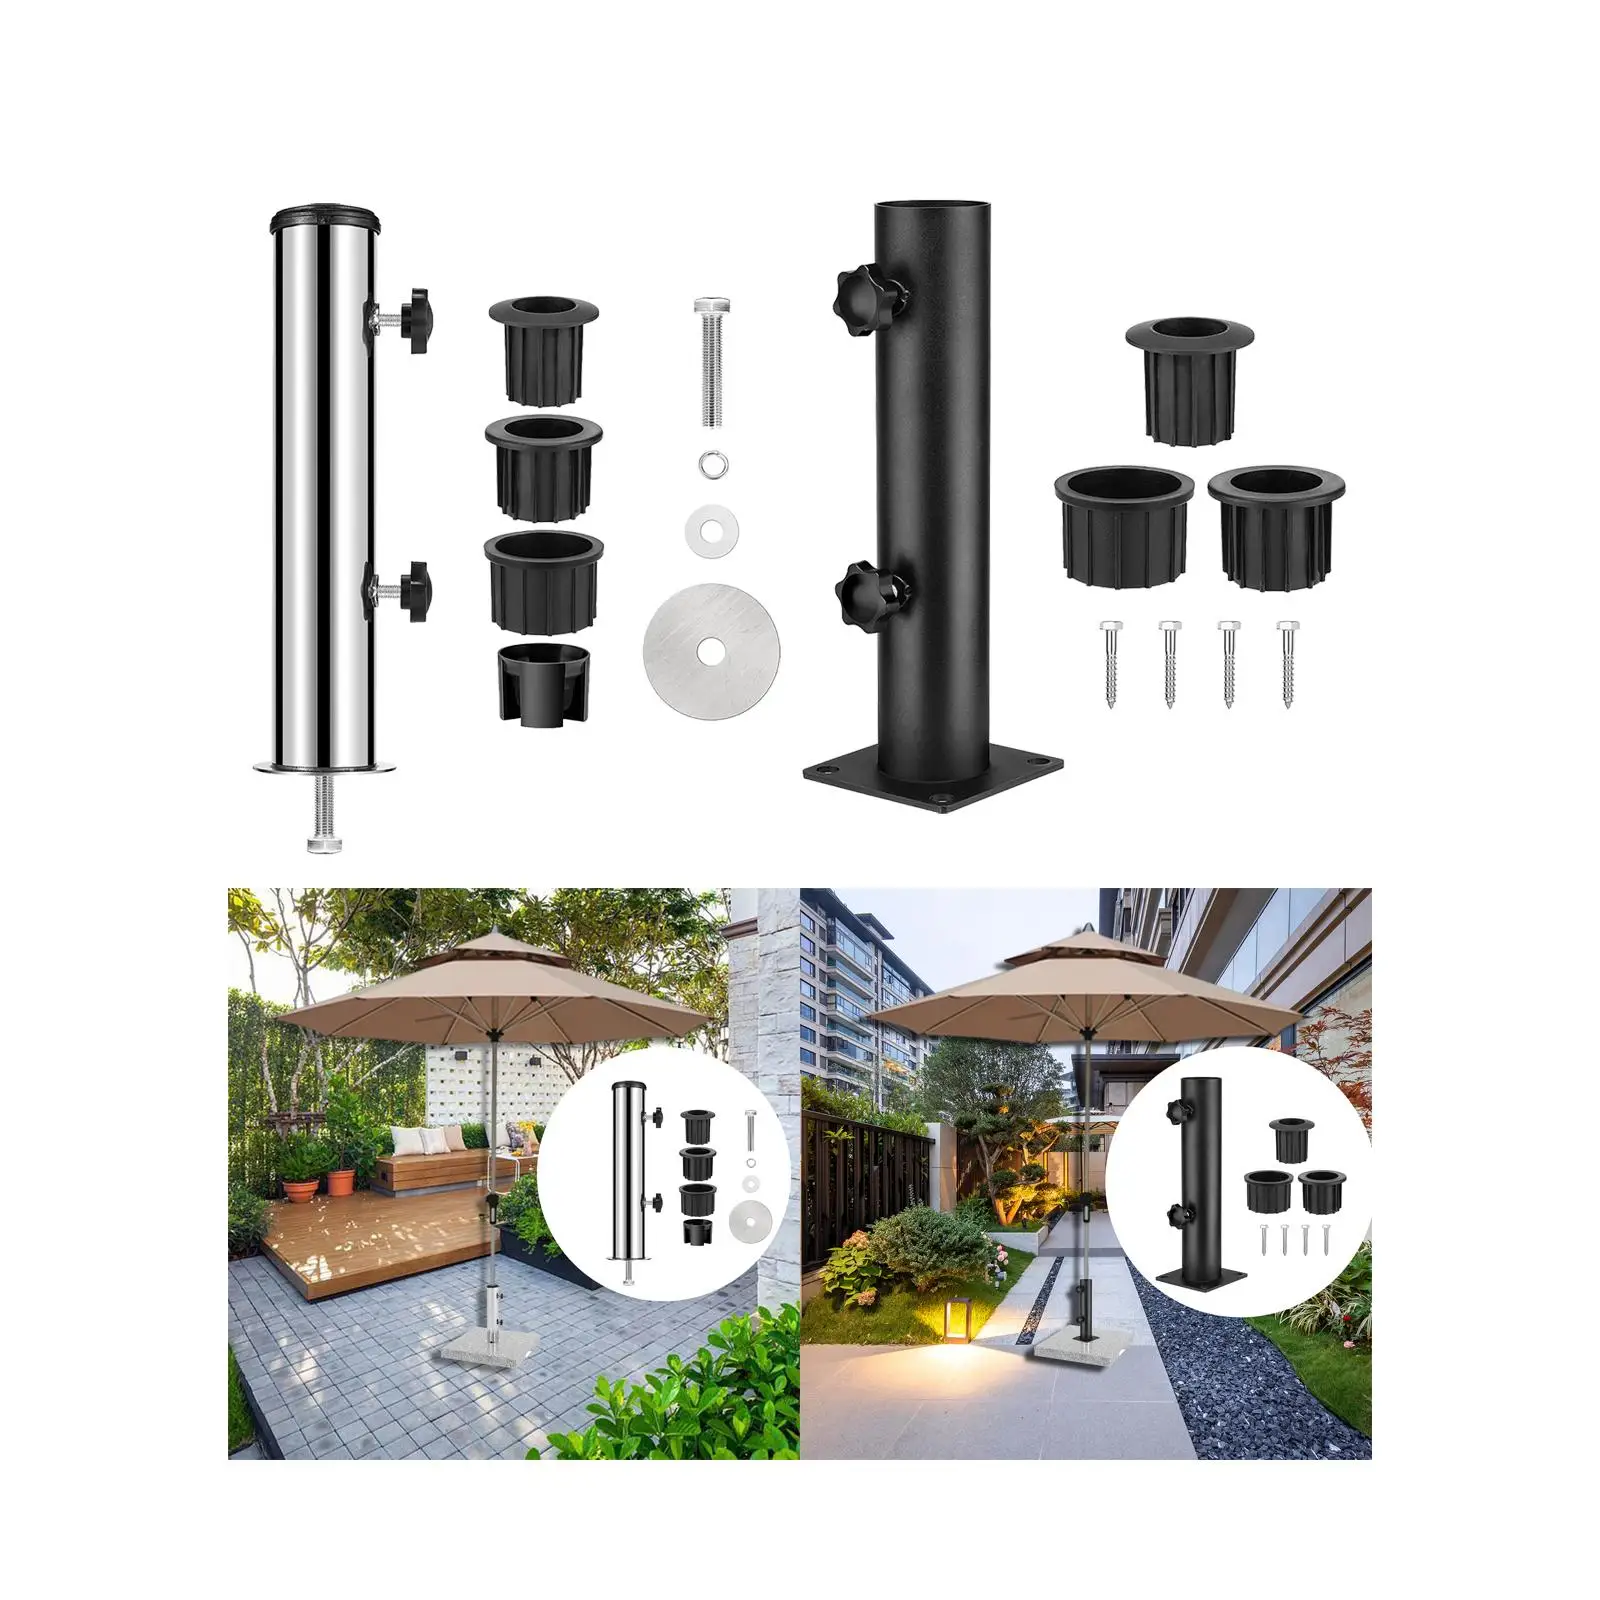 Umbrella Base Stand Fits 6cm Post Marble Flag Pole Holder Pole Holder Sun Shelter Deck for Lawn Garden Outdoor Outside Balcony